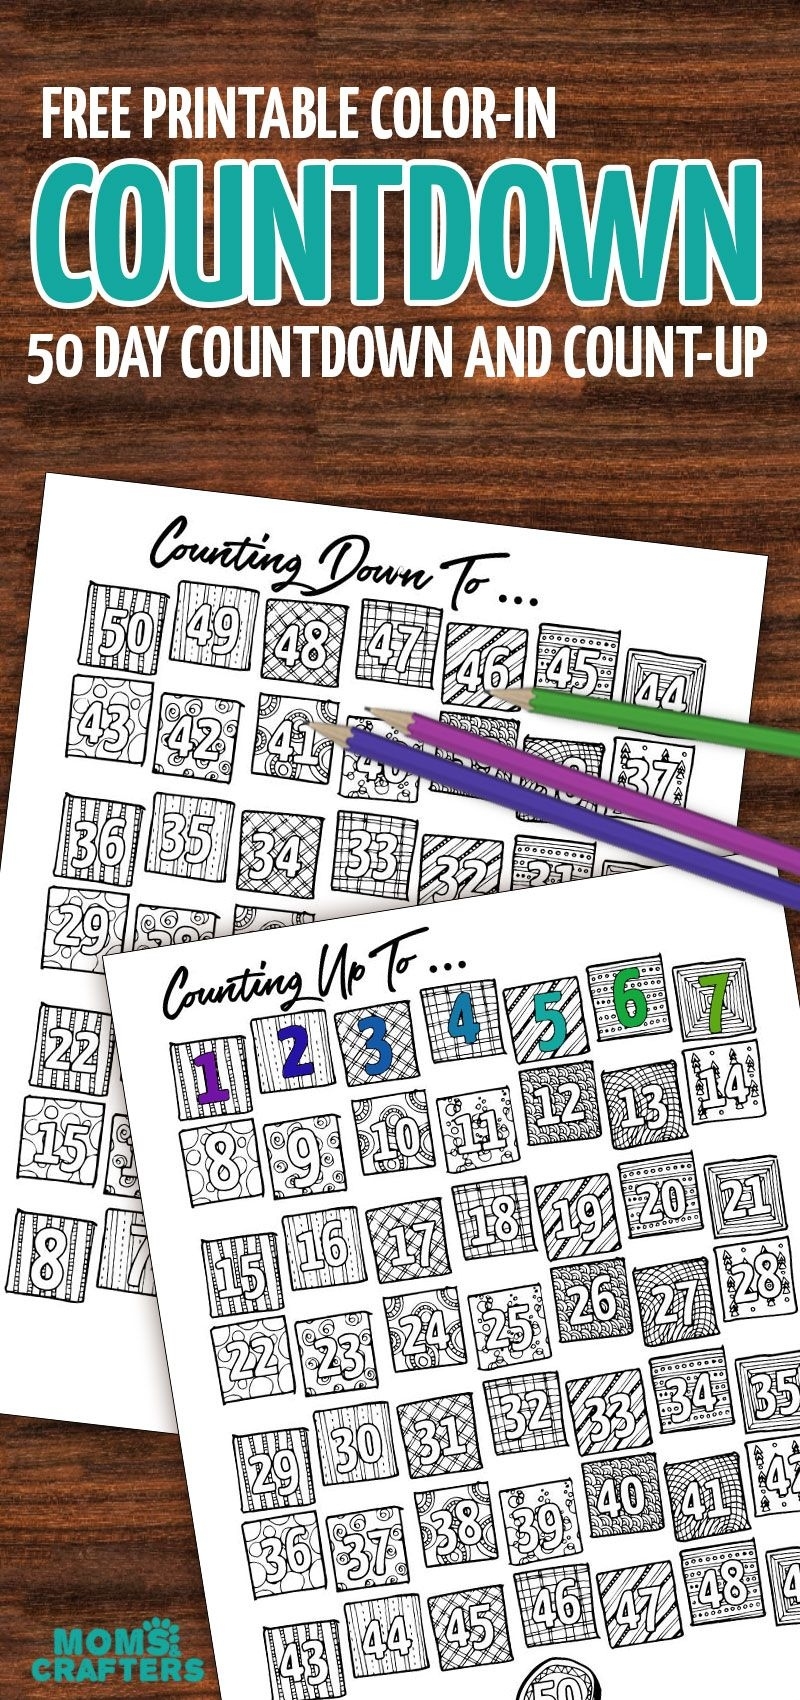 Grab This Fun Color-In Countdown And Progress Tracker | Moms And Countdown Calendar Summer Holiday